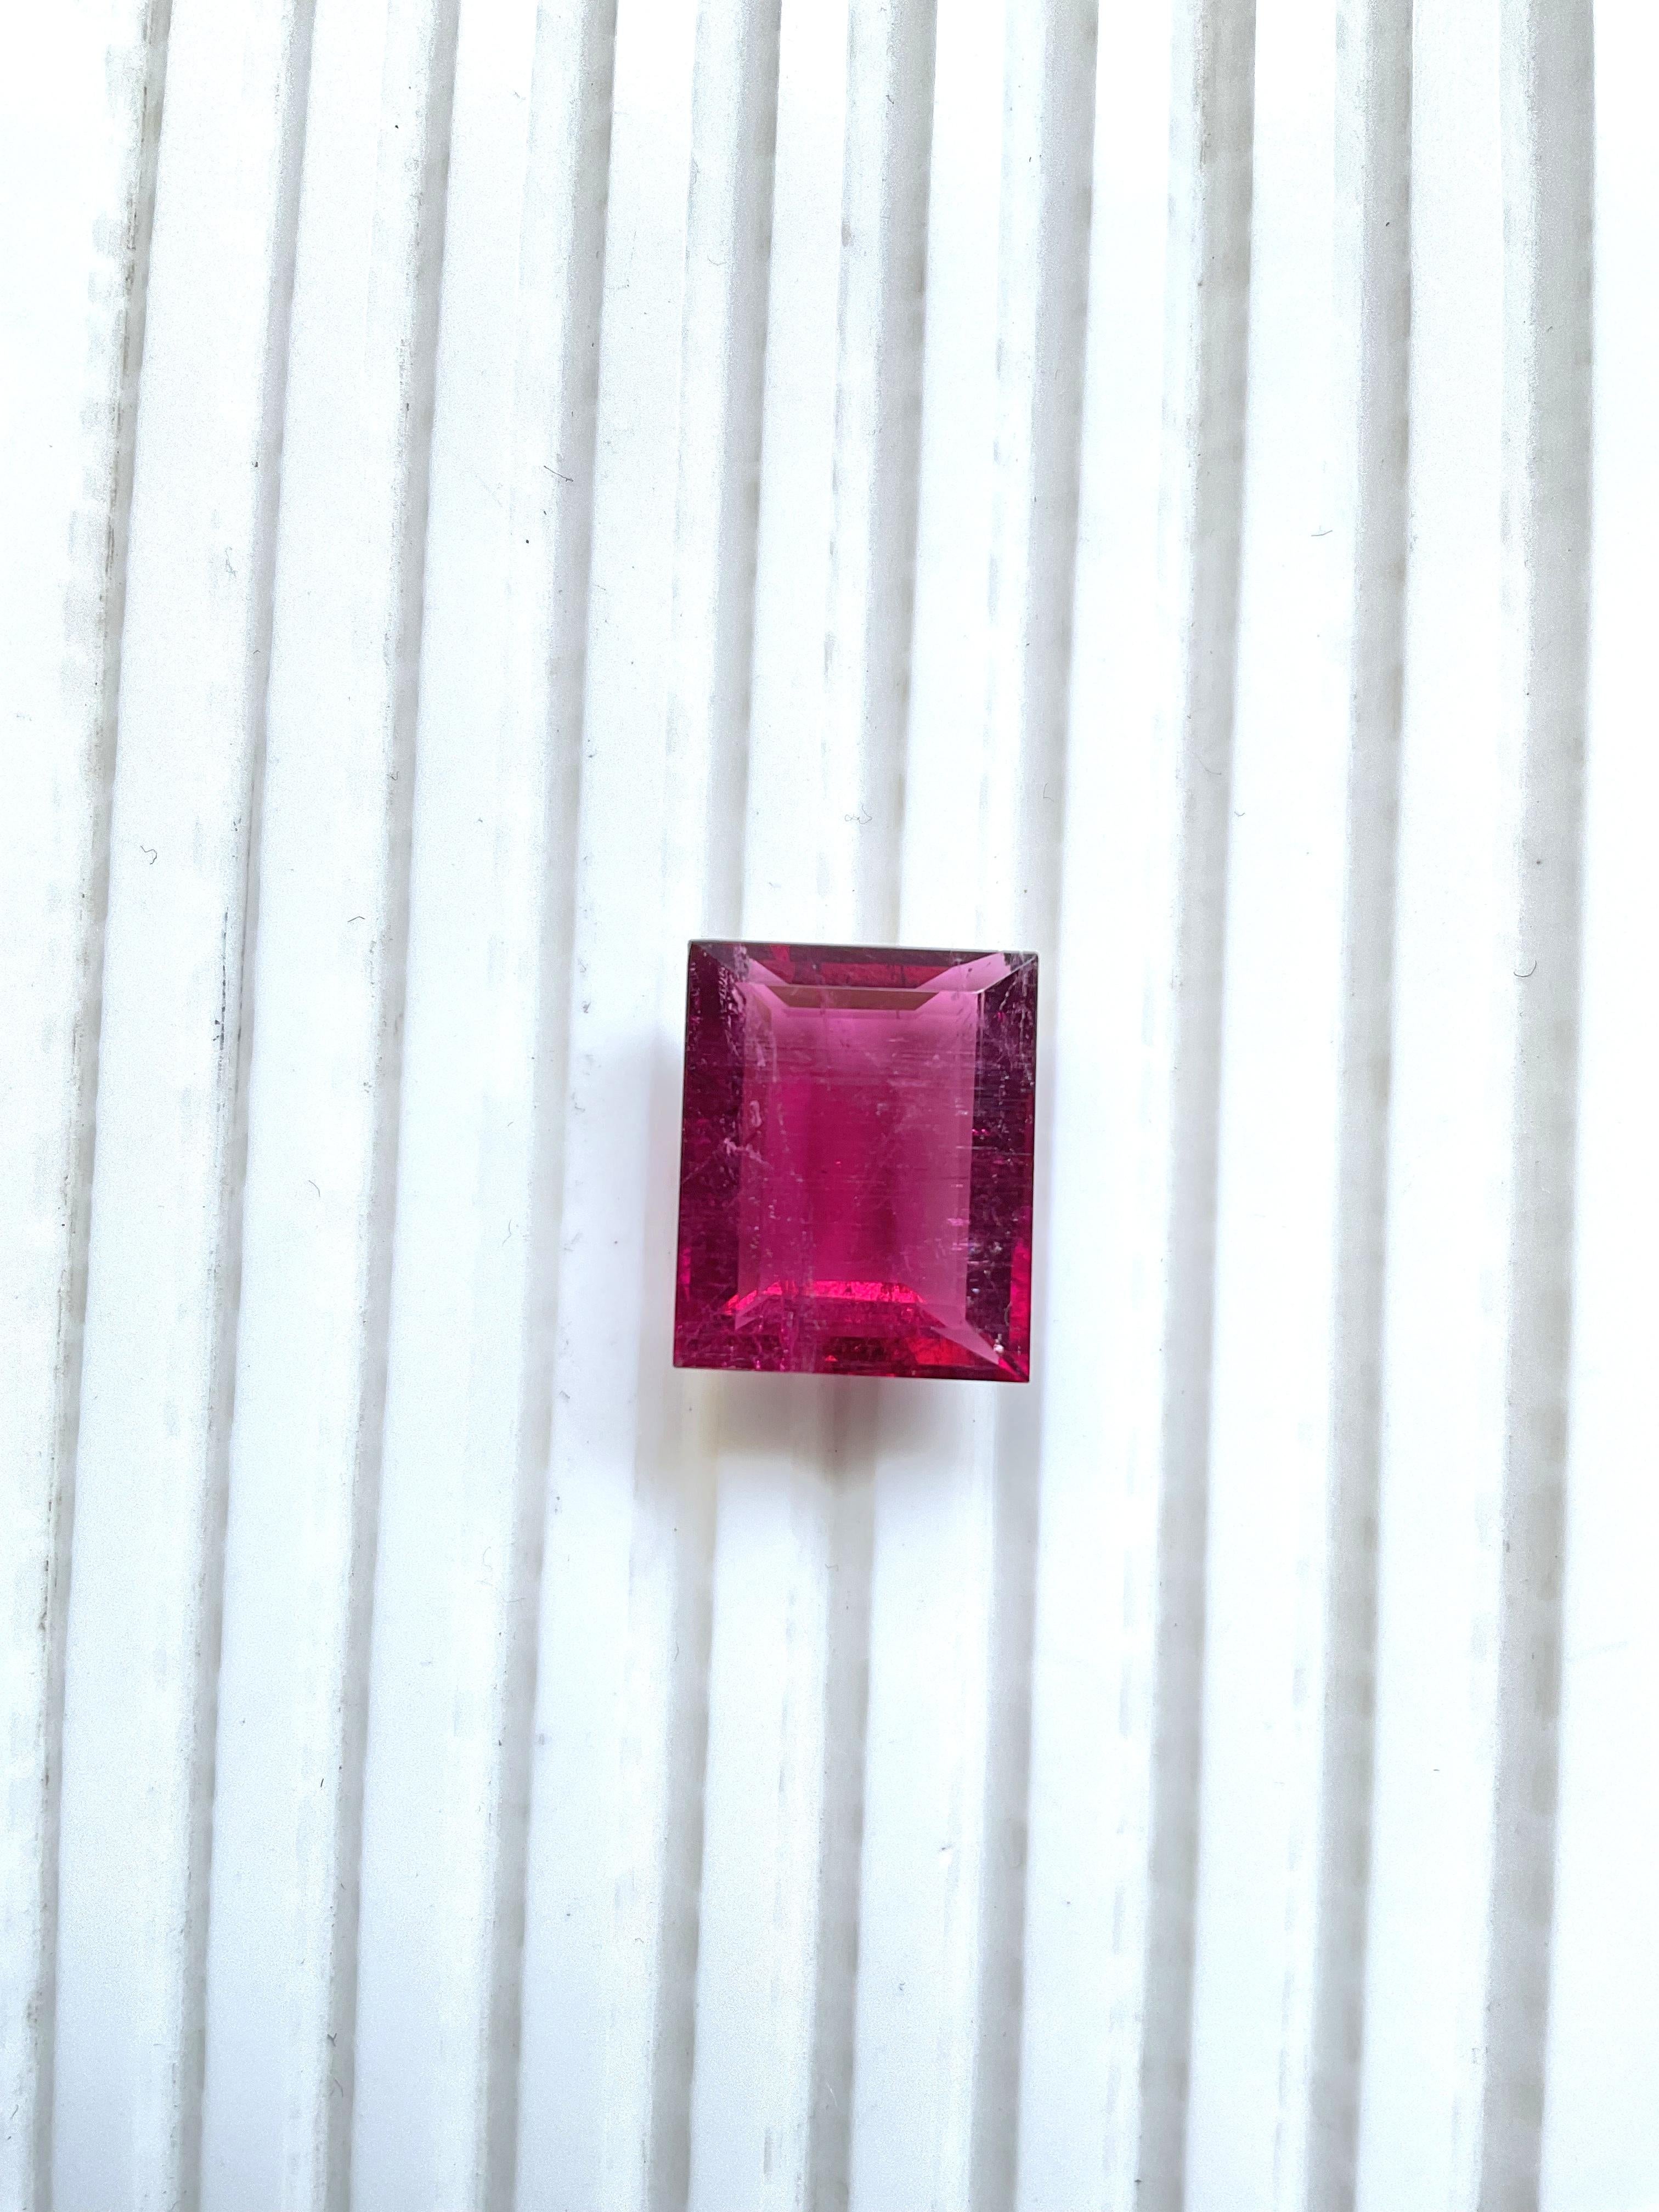 Contemporary 14.70 Carats Rubellite Tourmaline Octagon Cut Stone For Fine Jewelry Natural gem For Sale